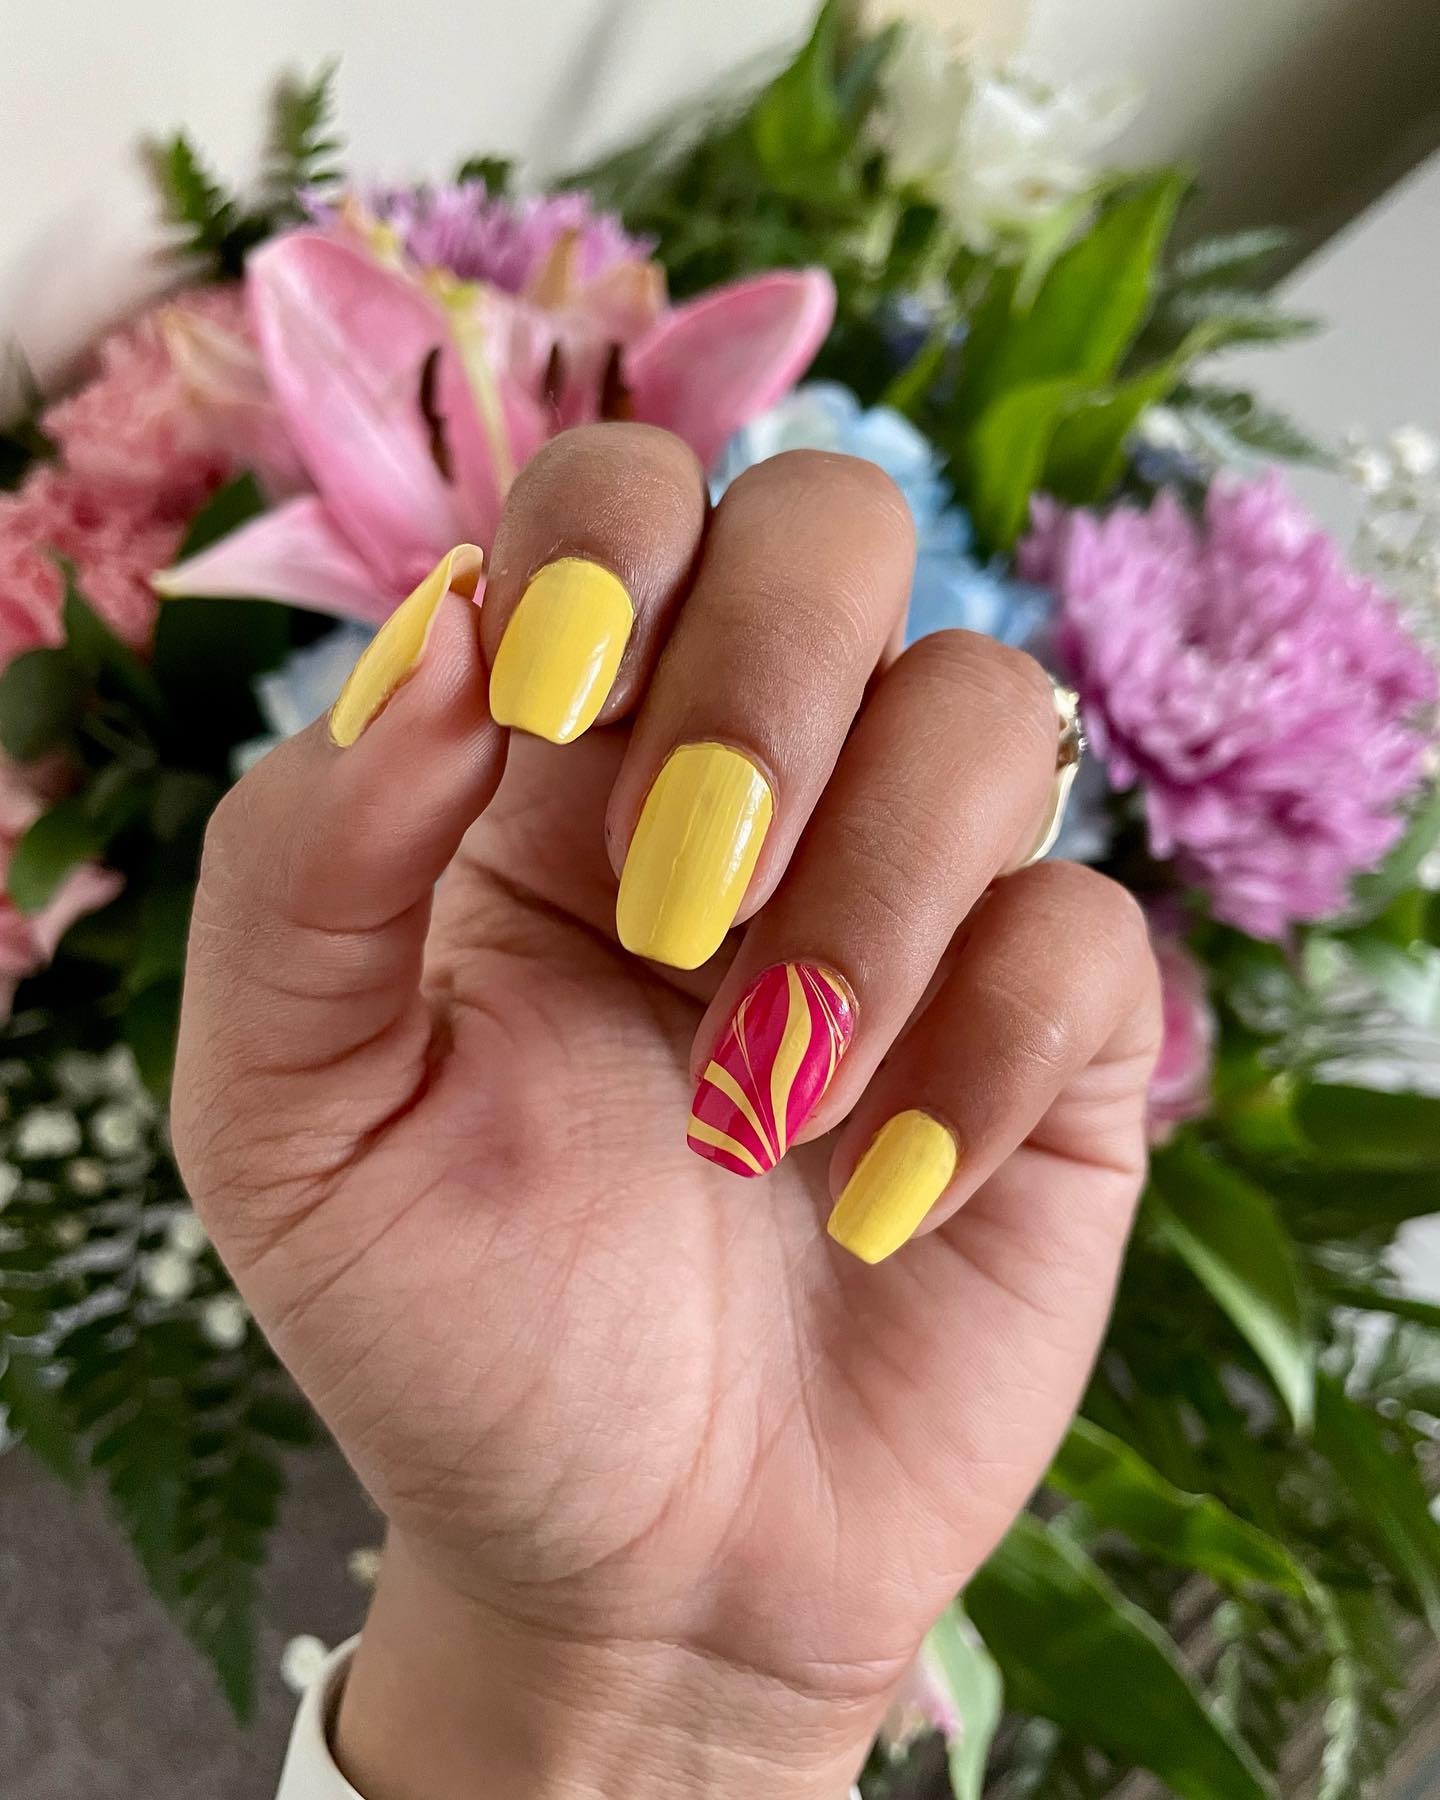 Just look at how yellow and pink go well together. The accent nail looks amazing with all of its water marble style.